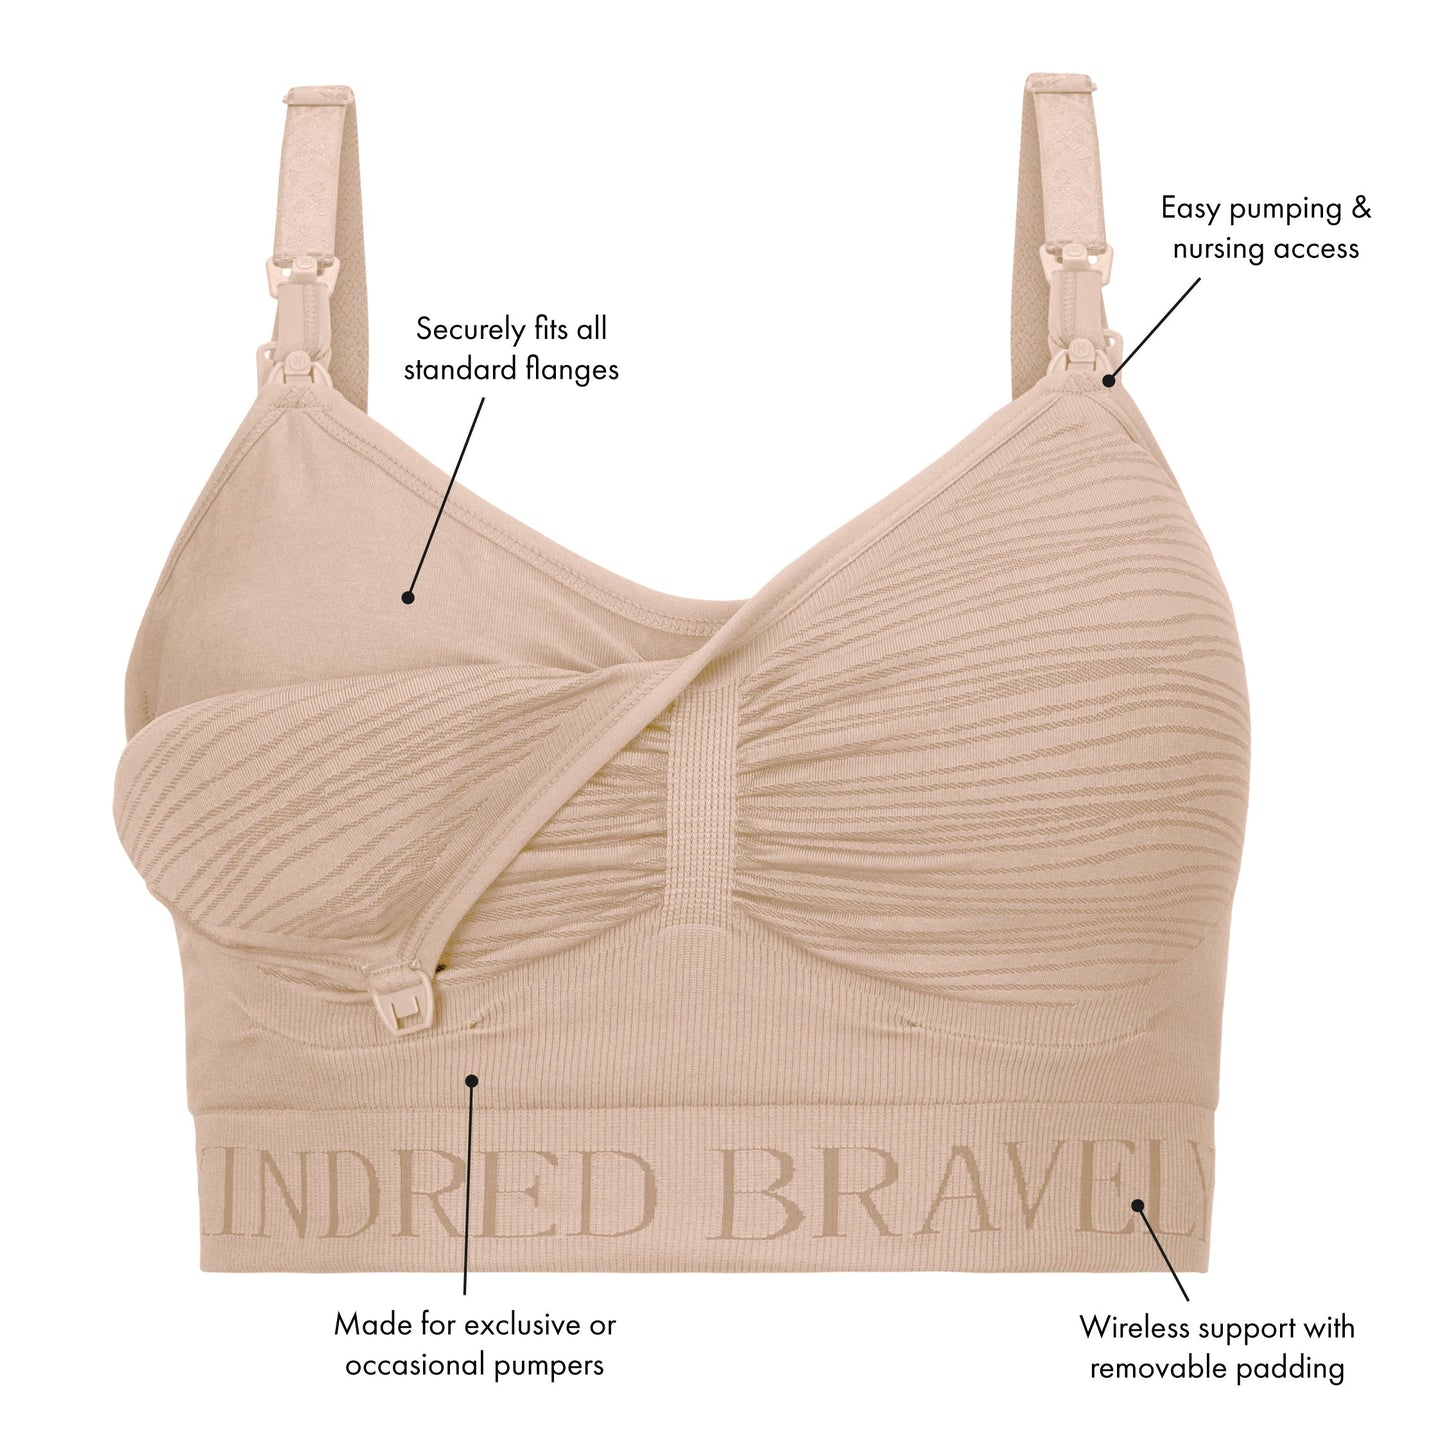 Diagram of a Sublime® Hands-Free Pumping & Nursing Bra - Super Busty in Beige showing the easy pumping & Nursing access and the wireless support. 